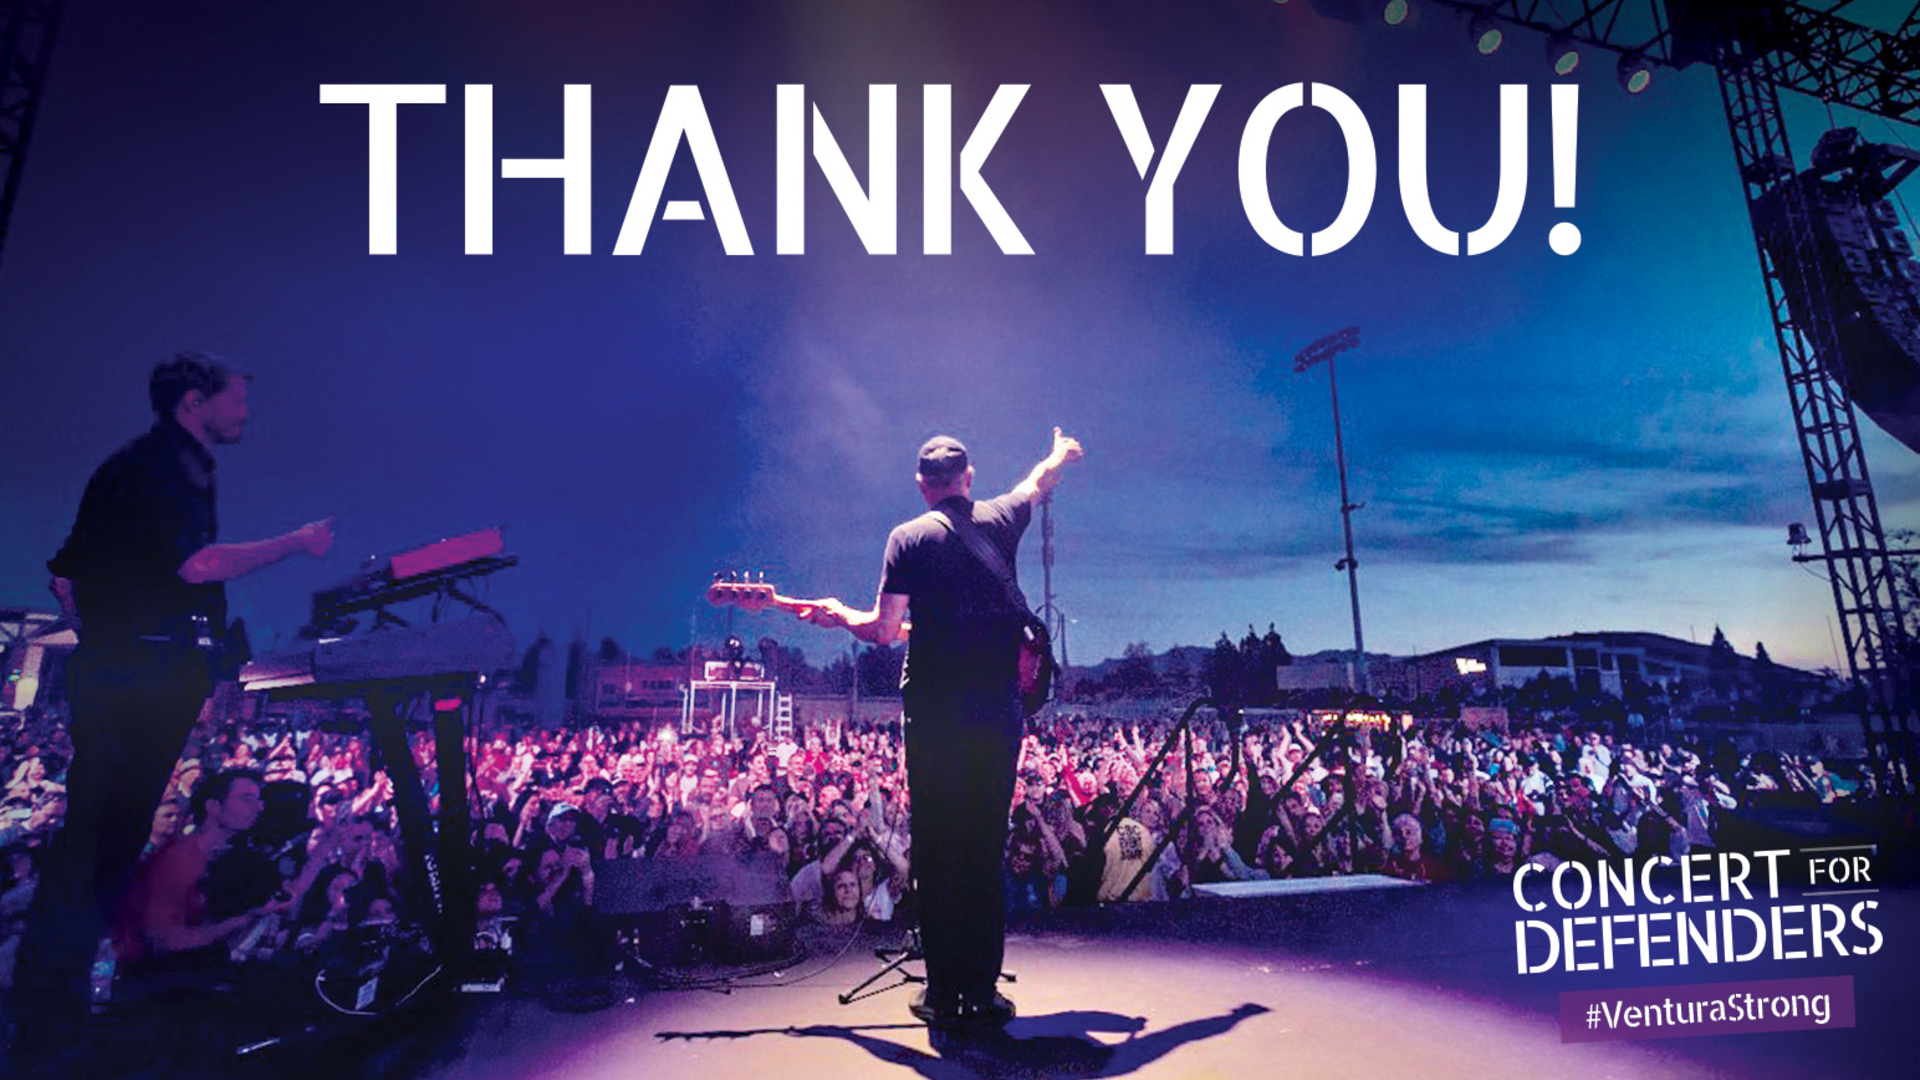 Concert for Defenders 'Thank You' Header Photo